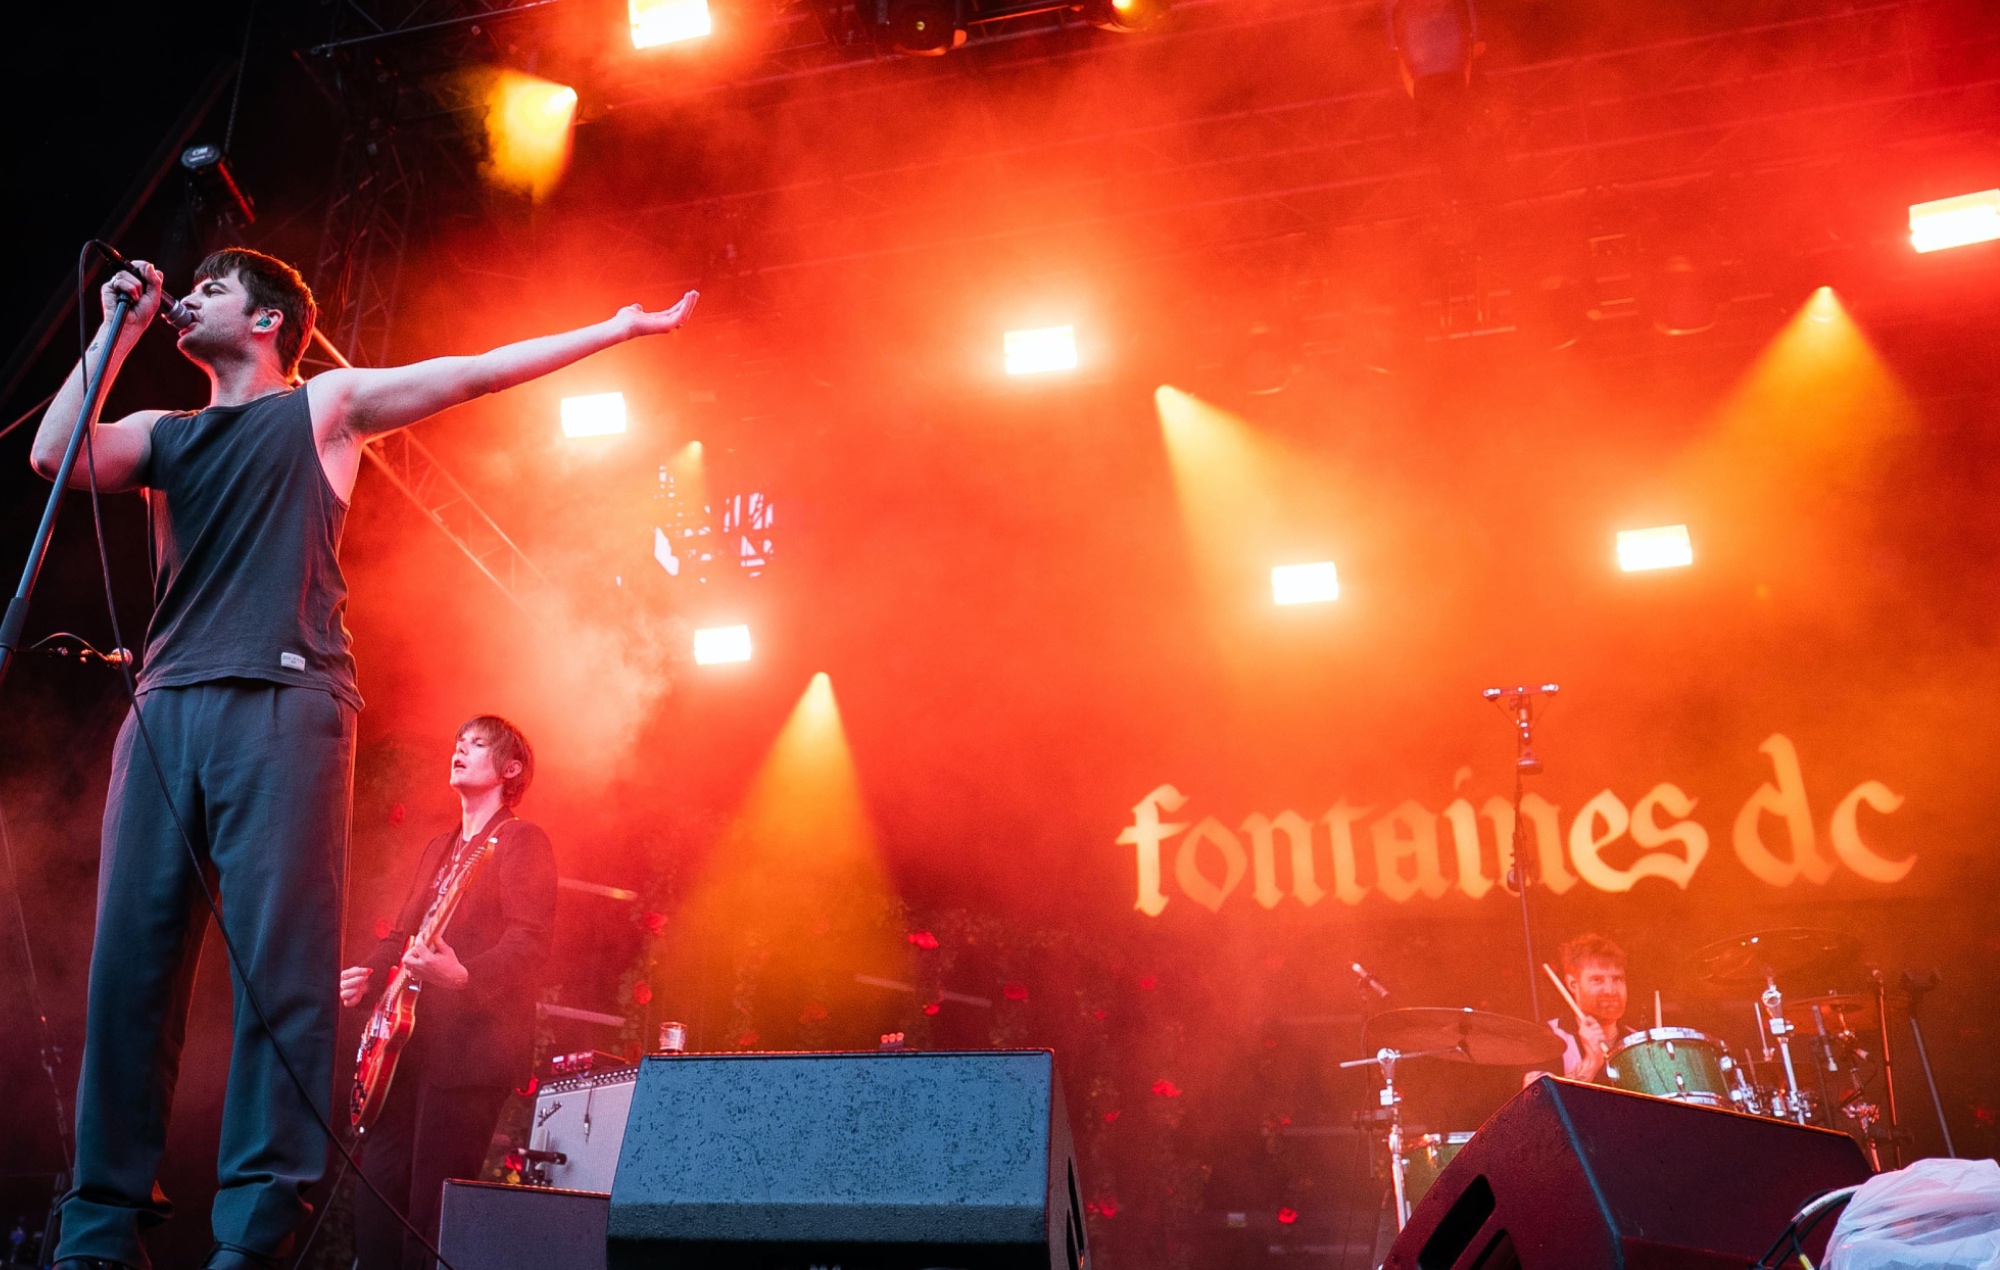 Fontaines D.C. performing live on stage